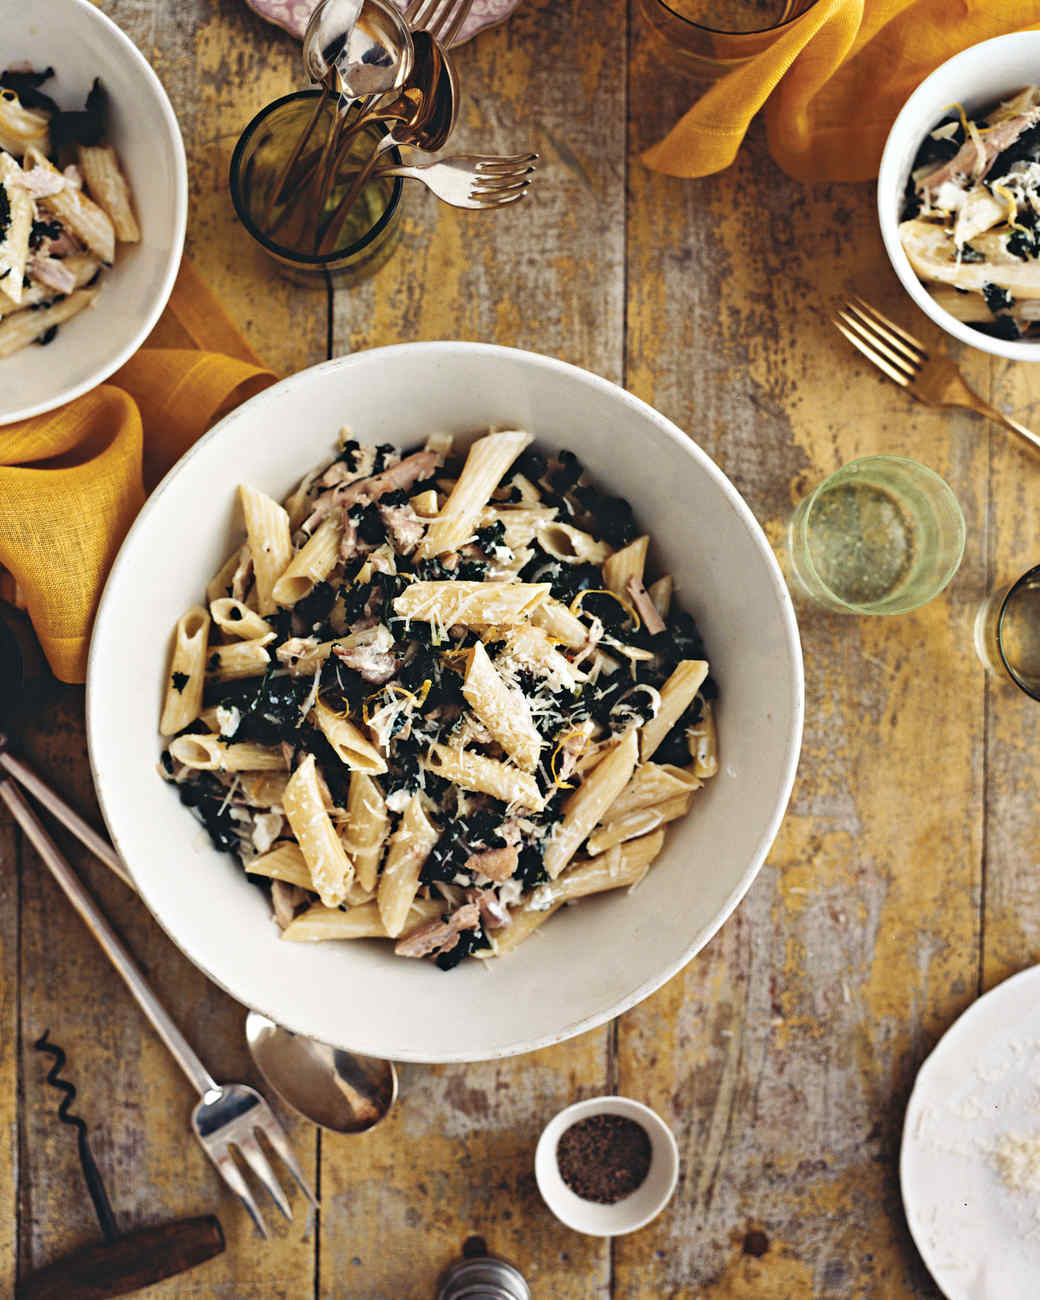 Kale Thanksgiving Recipes
 Penne with Goat Cheese Kale Olives and Turkey Recipe